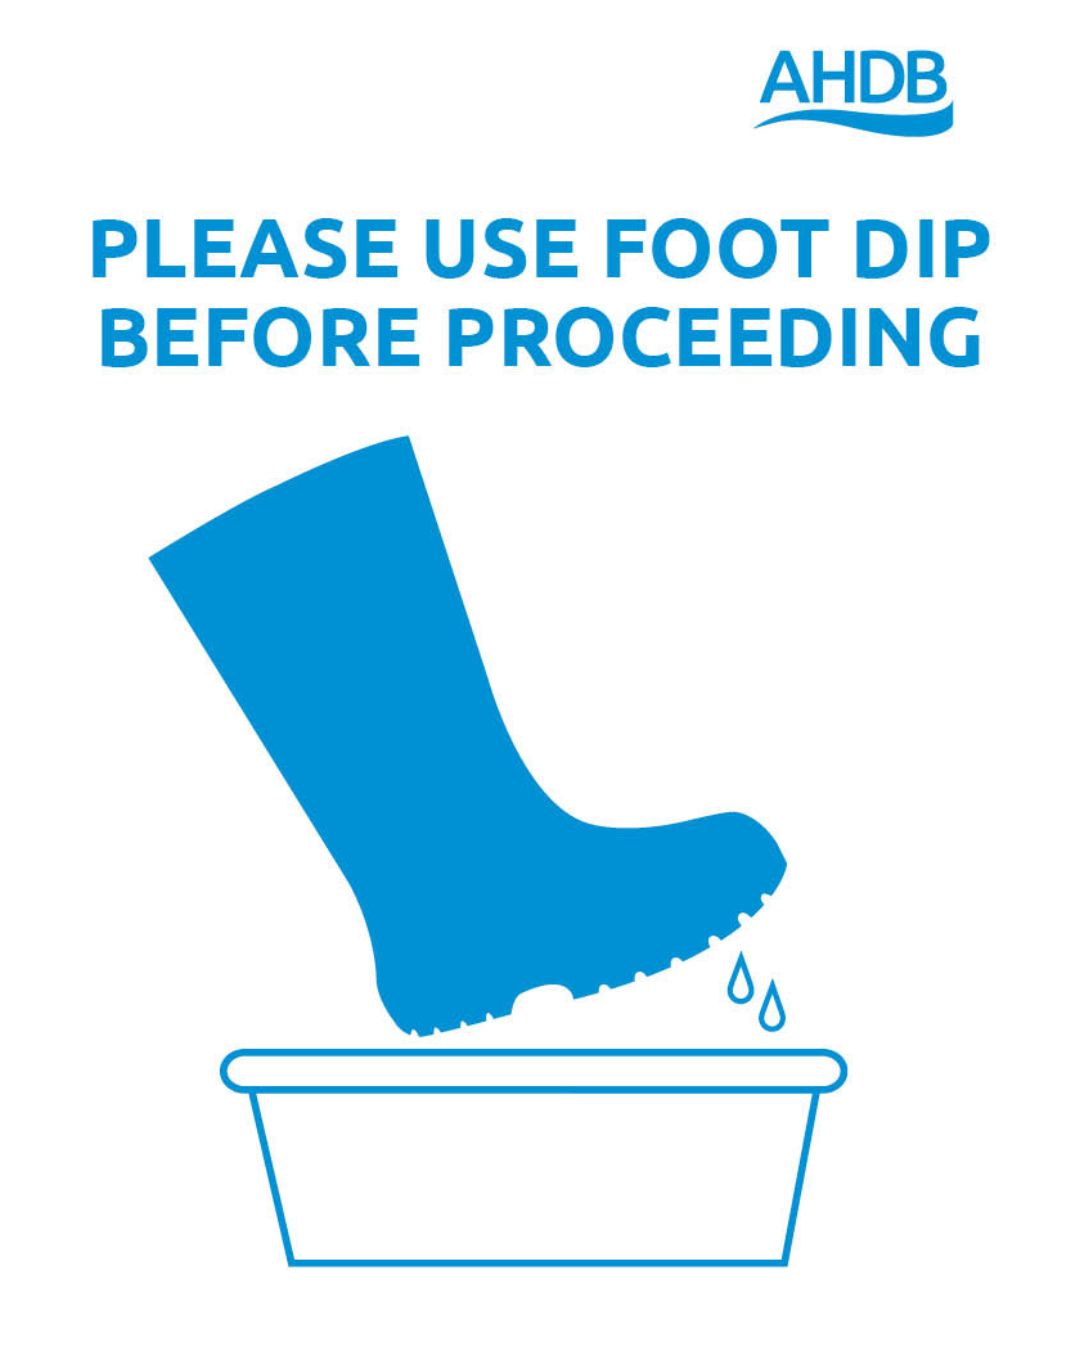 Footdip sign to remind people do use the footdip